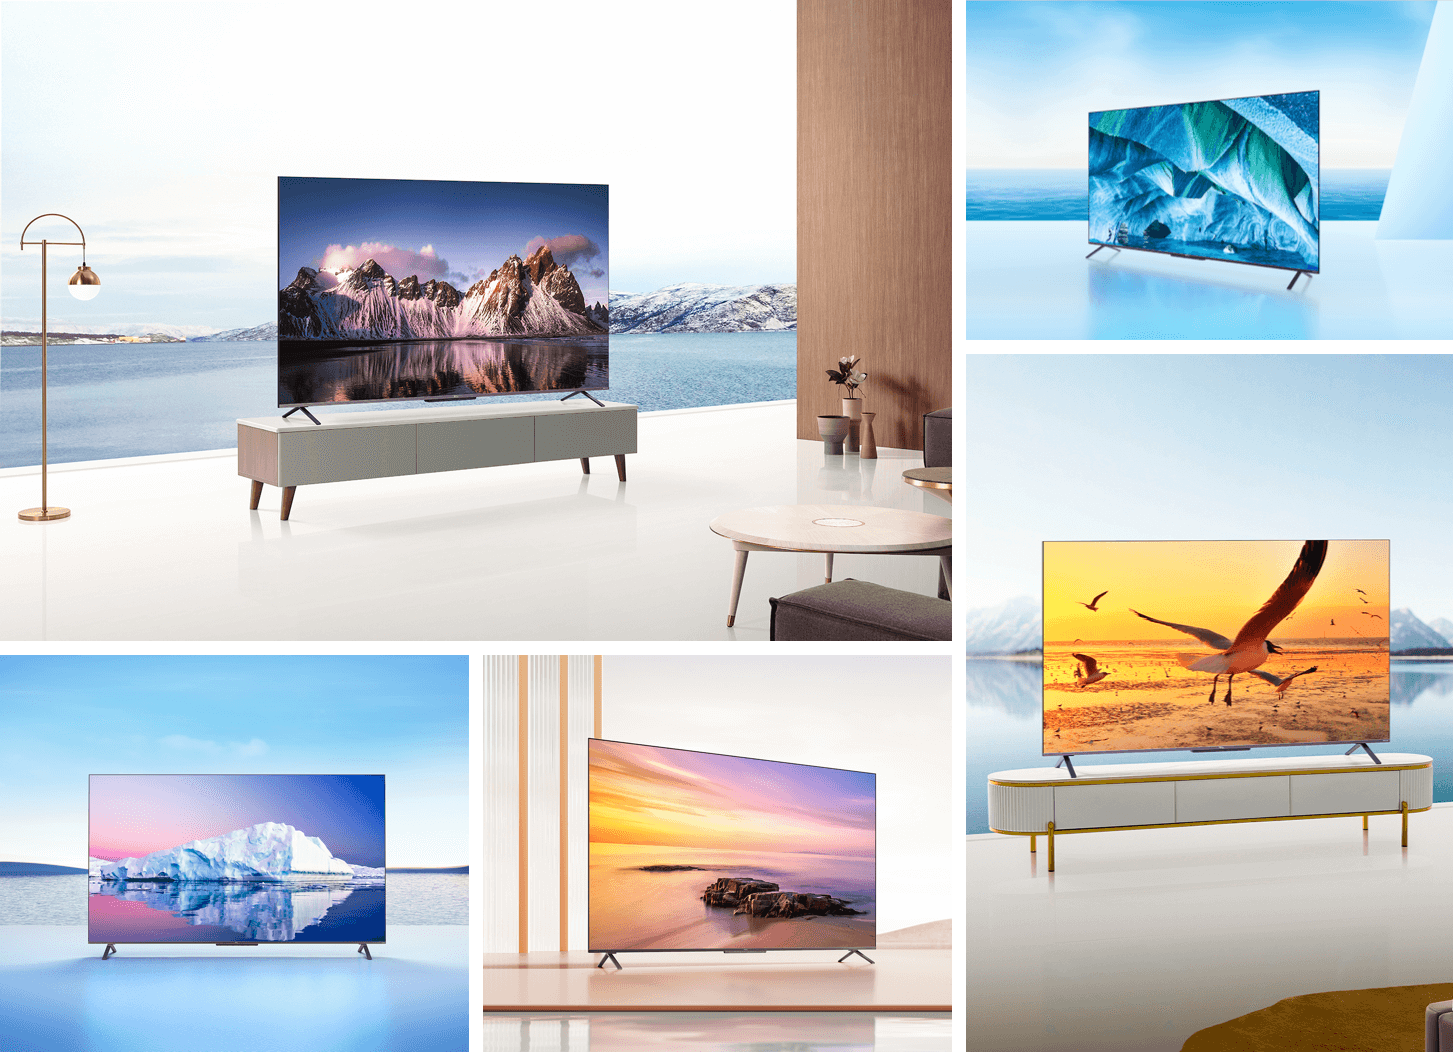 TCL C725 4K QLED TV With Dolby Vision - TCL Global